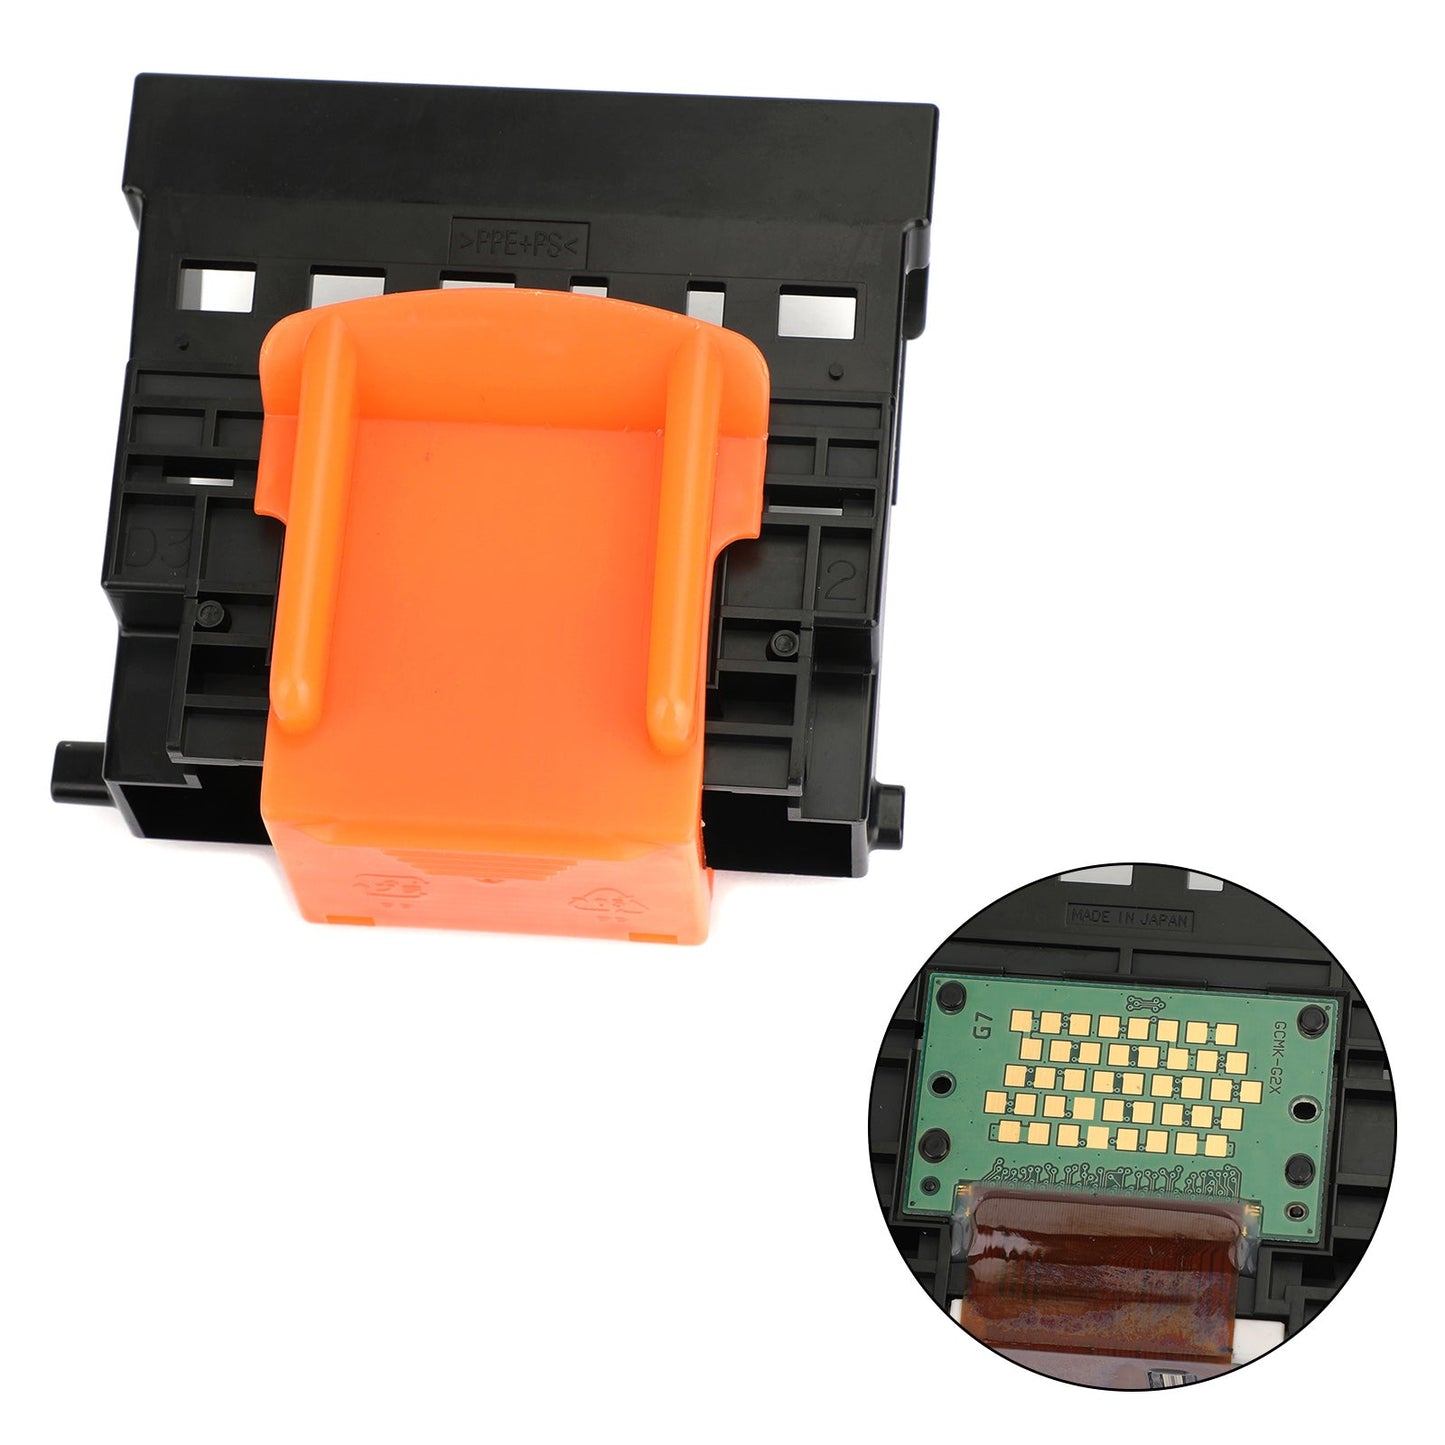 Replacement Printer Print Head QY6-0049 For I865 IP4000 MP760 MP780 IP4100,Full Color QY6-0049 Printhead Printer Head for IP4000 IP4100 IP4000R IP4100R,Reufrbished Printer Print Head for MP770 MP790 PIXMA MP750 MP760 MP780 QY6-0049